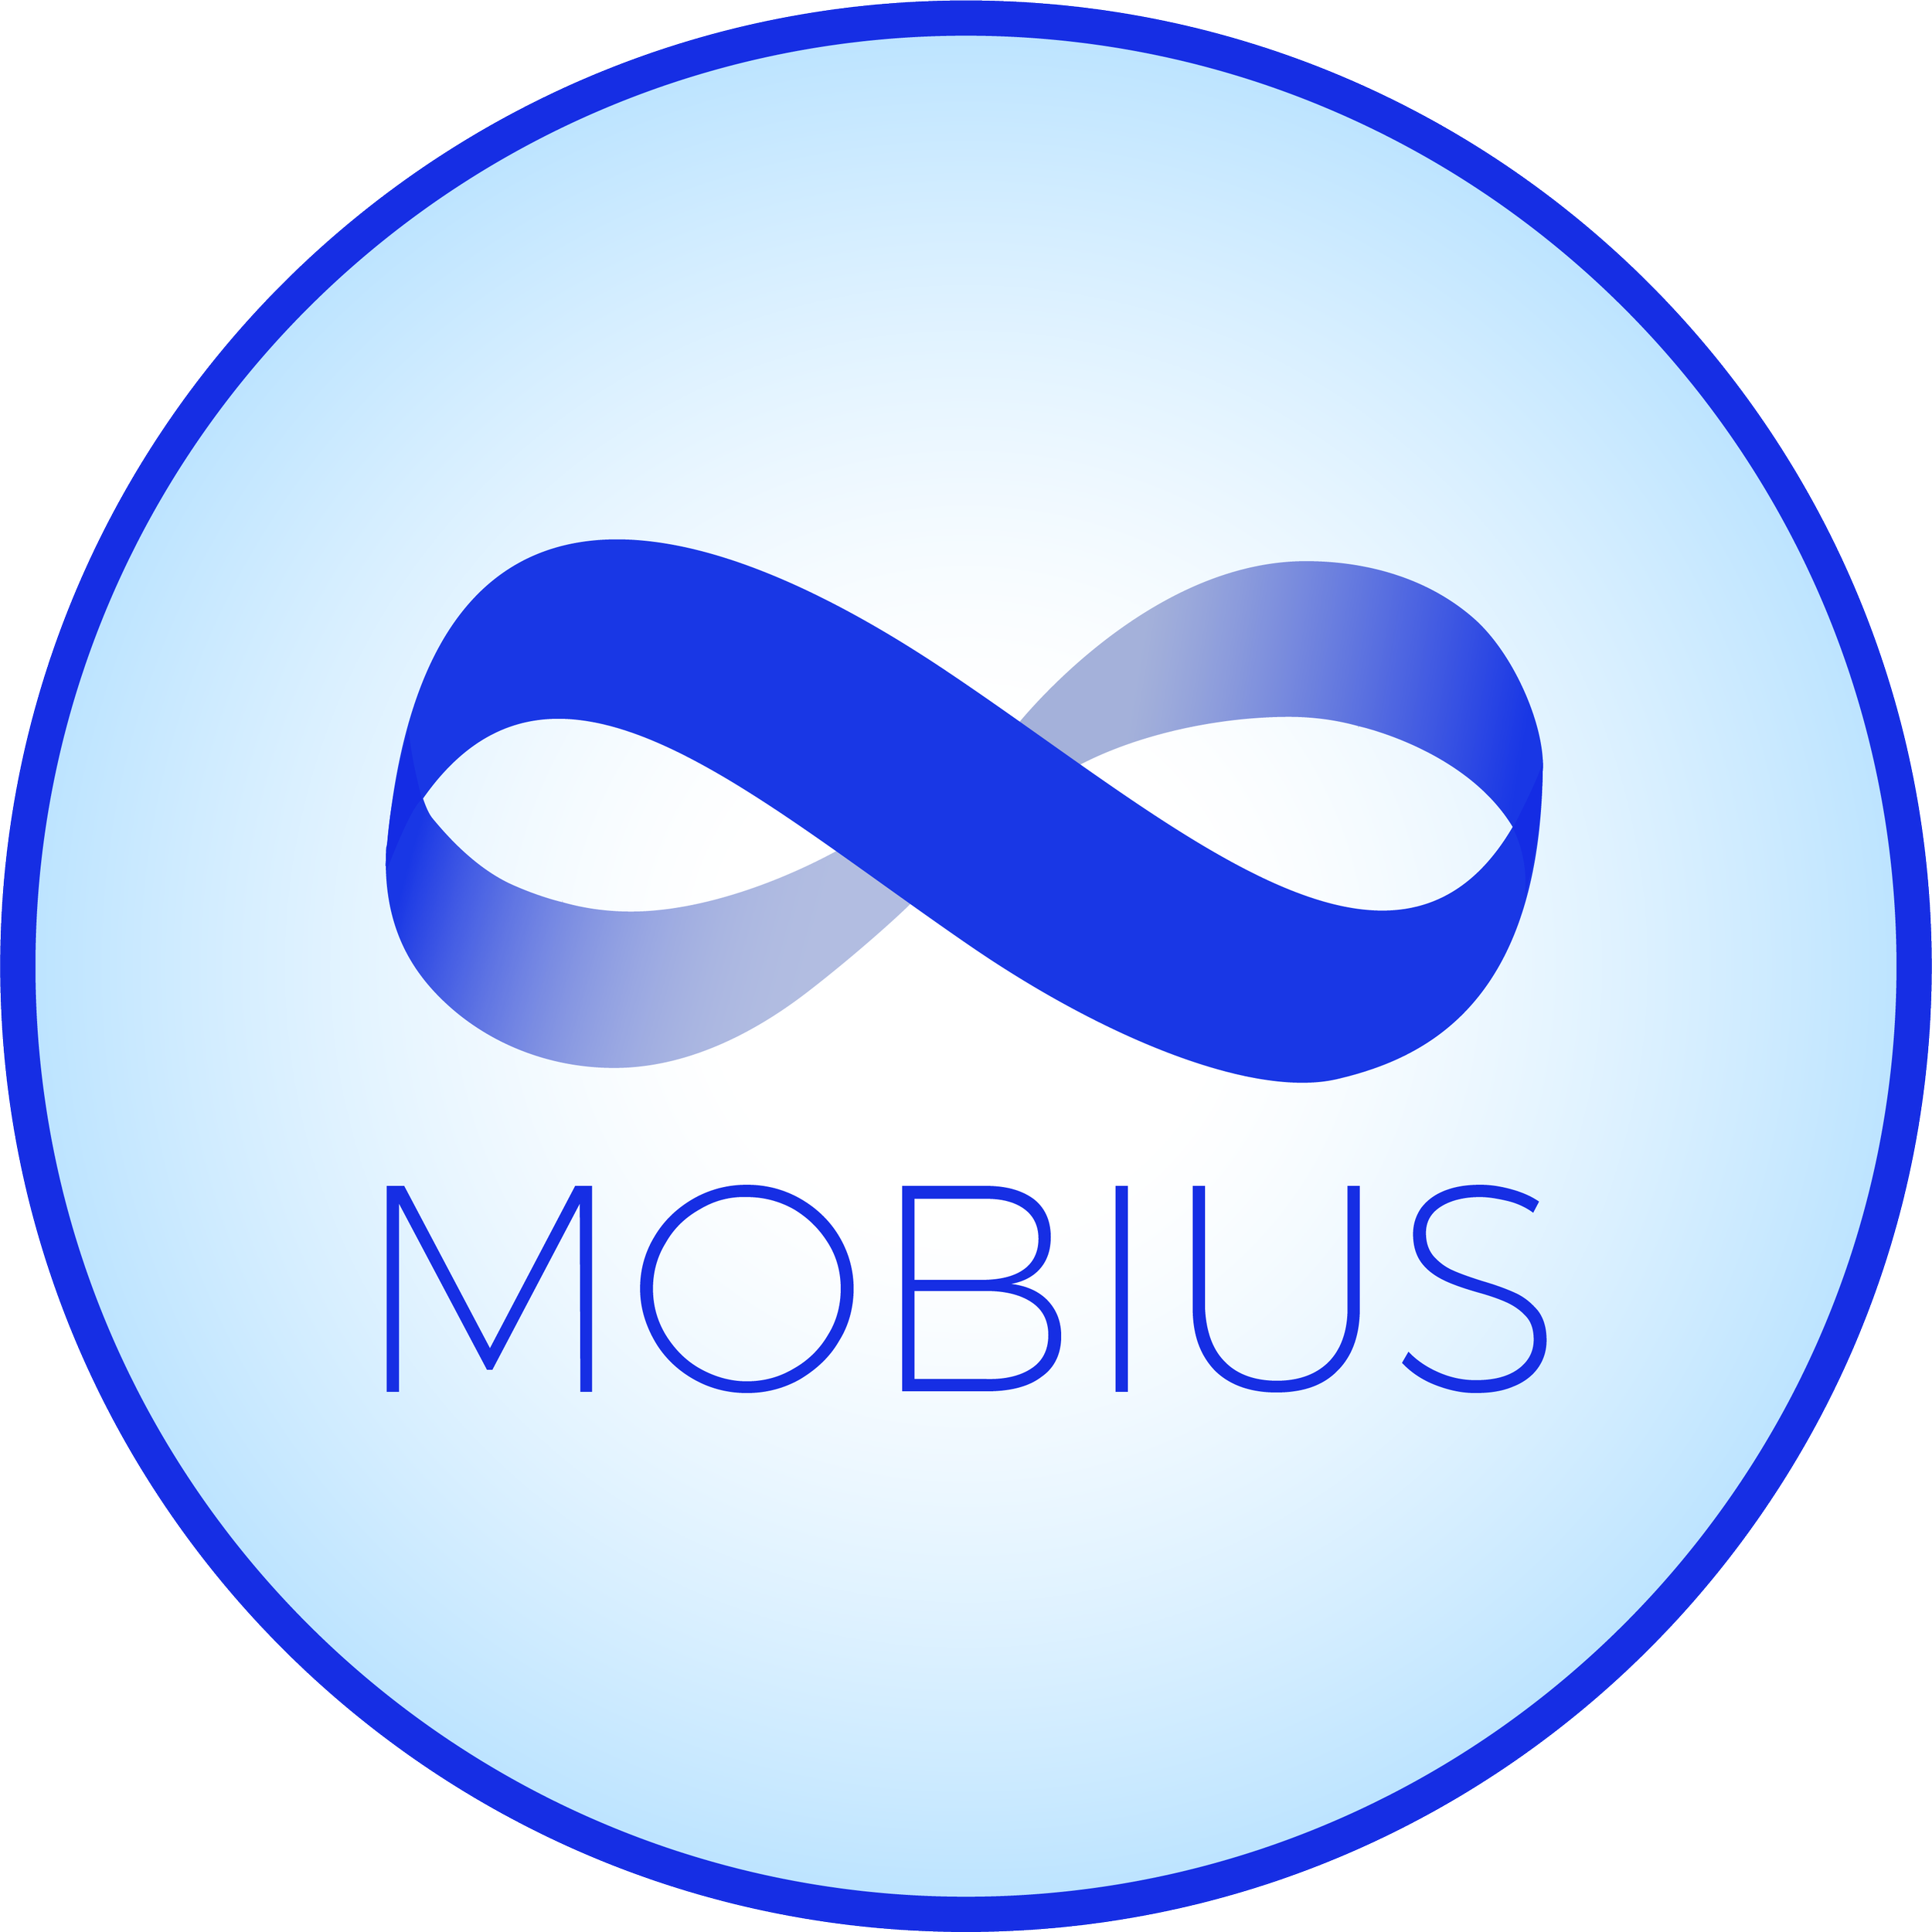 Mobius - Logo in Circle with Text.png